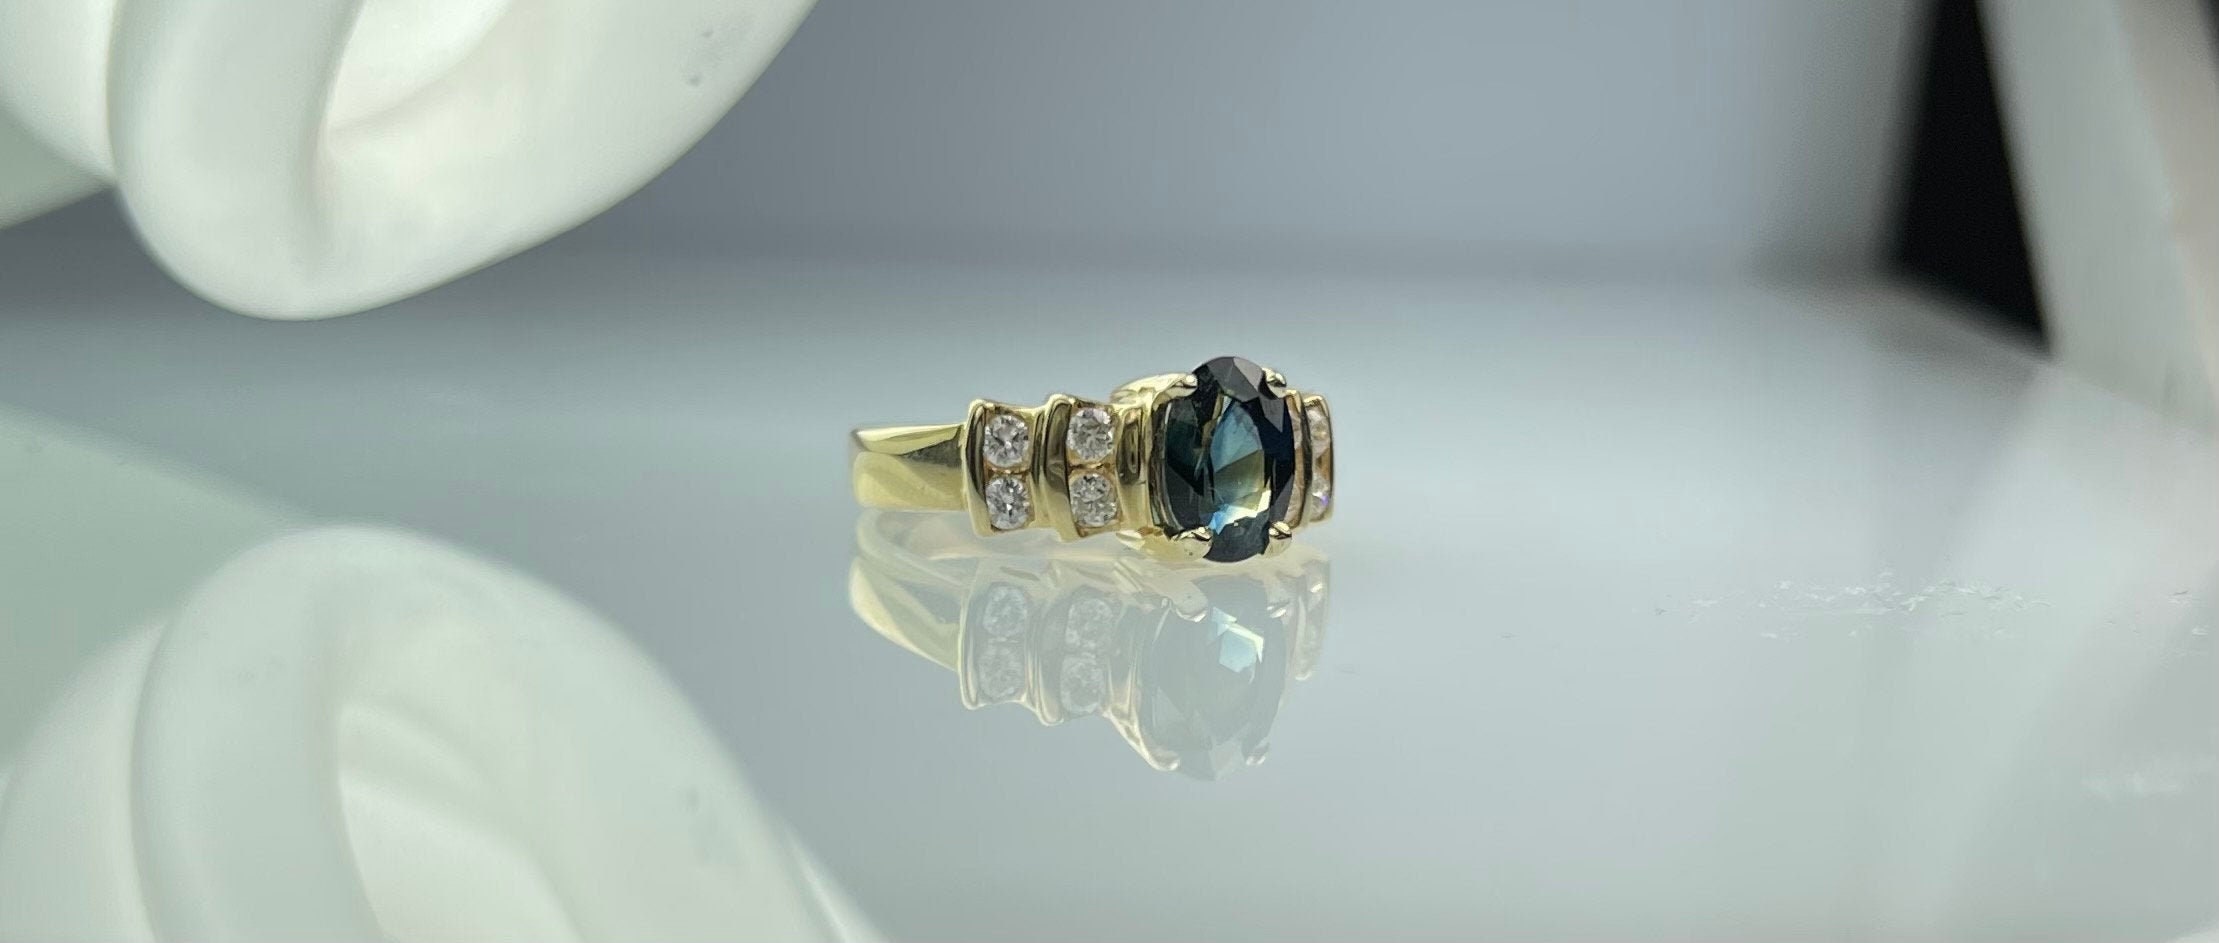 Product Image for Oval Sapphire & Diamond ring - 14k yellow gold